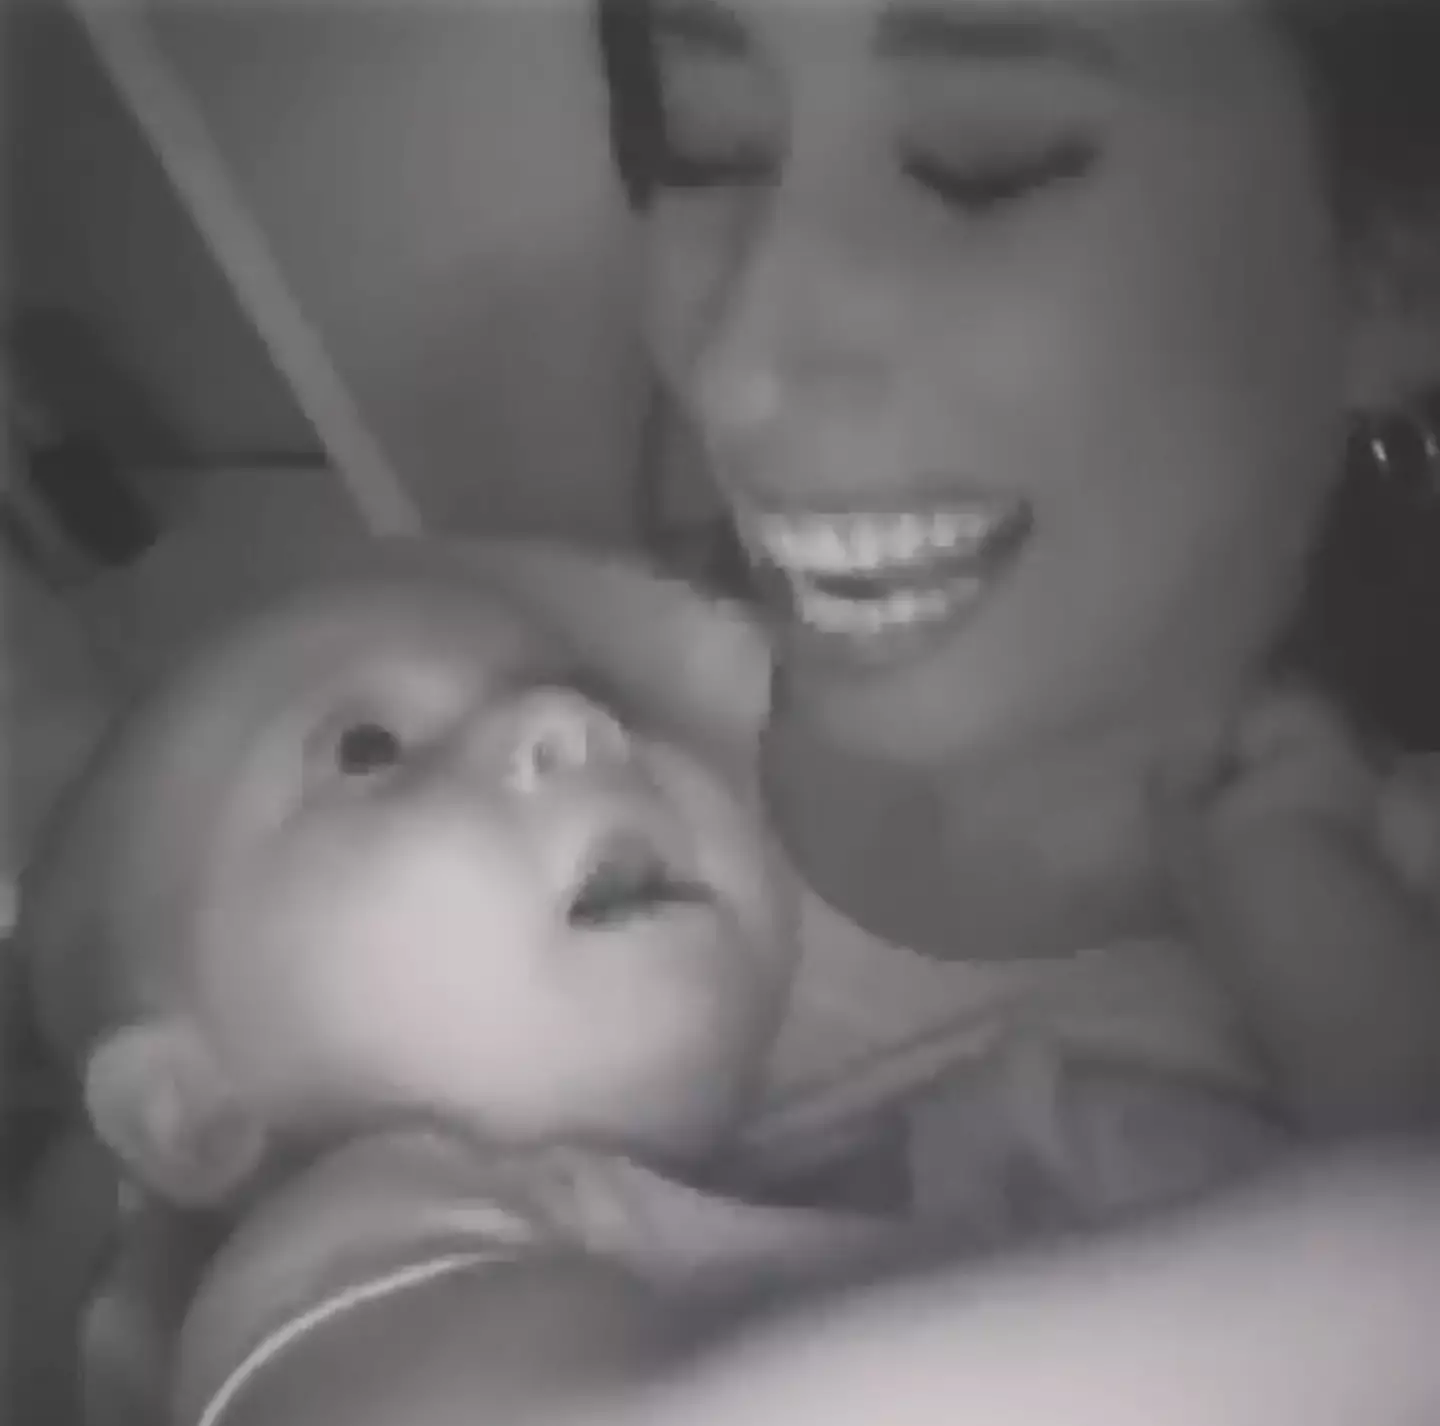 Stacey was thrilled when she heard baby Rose's first word. (Credit : Instagram/@staceysolomon)